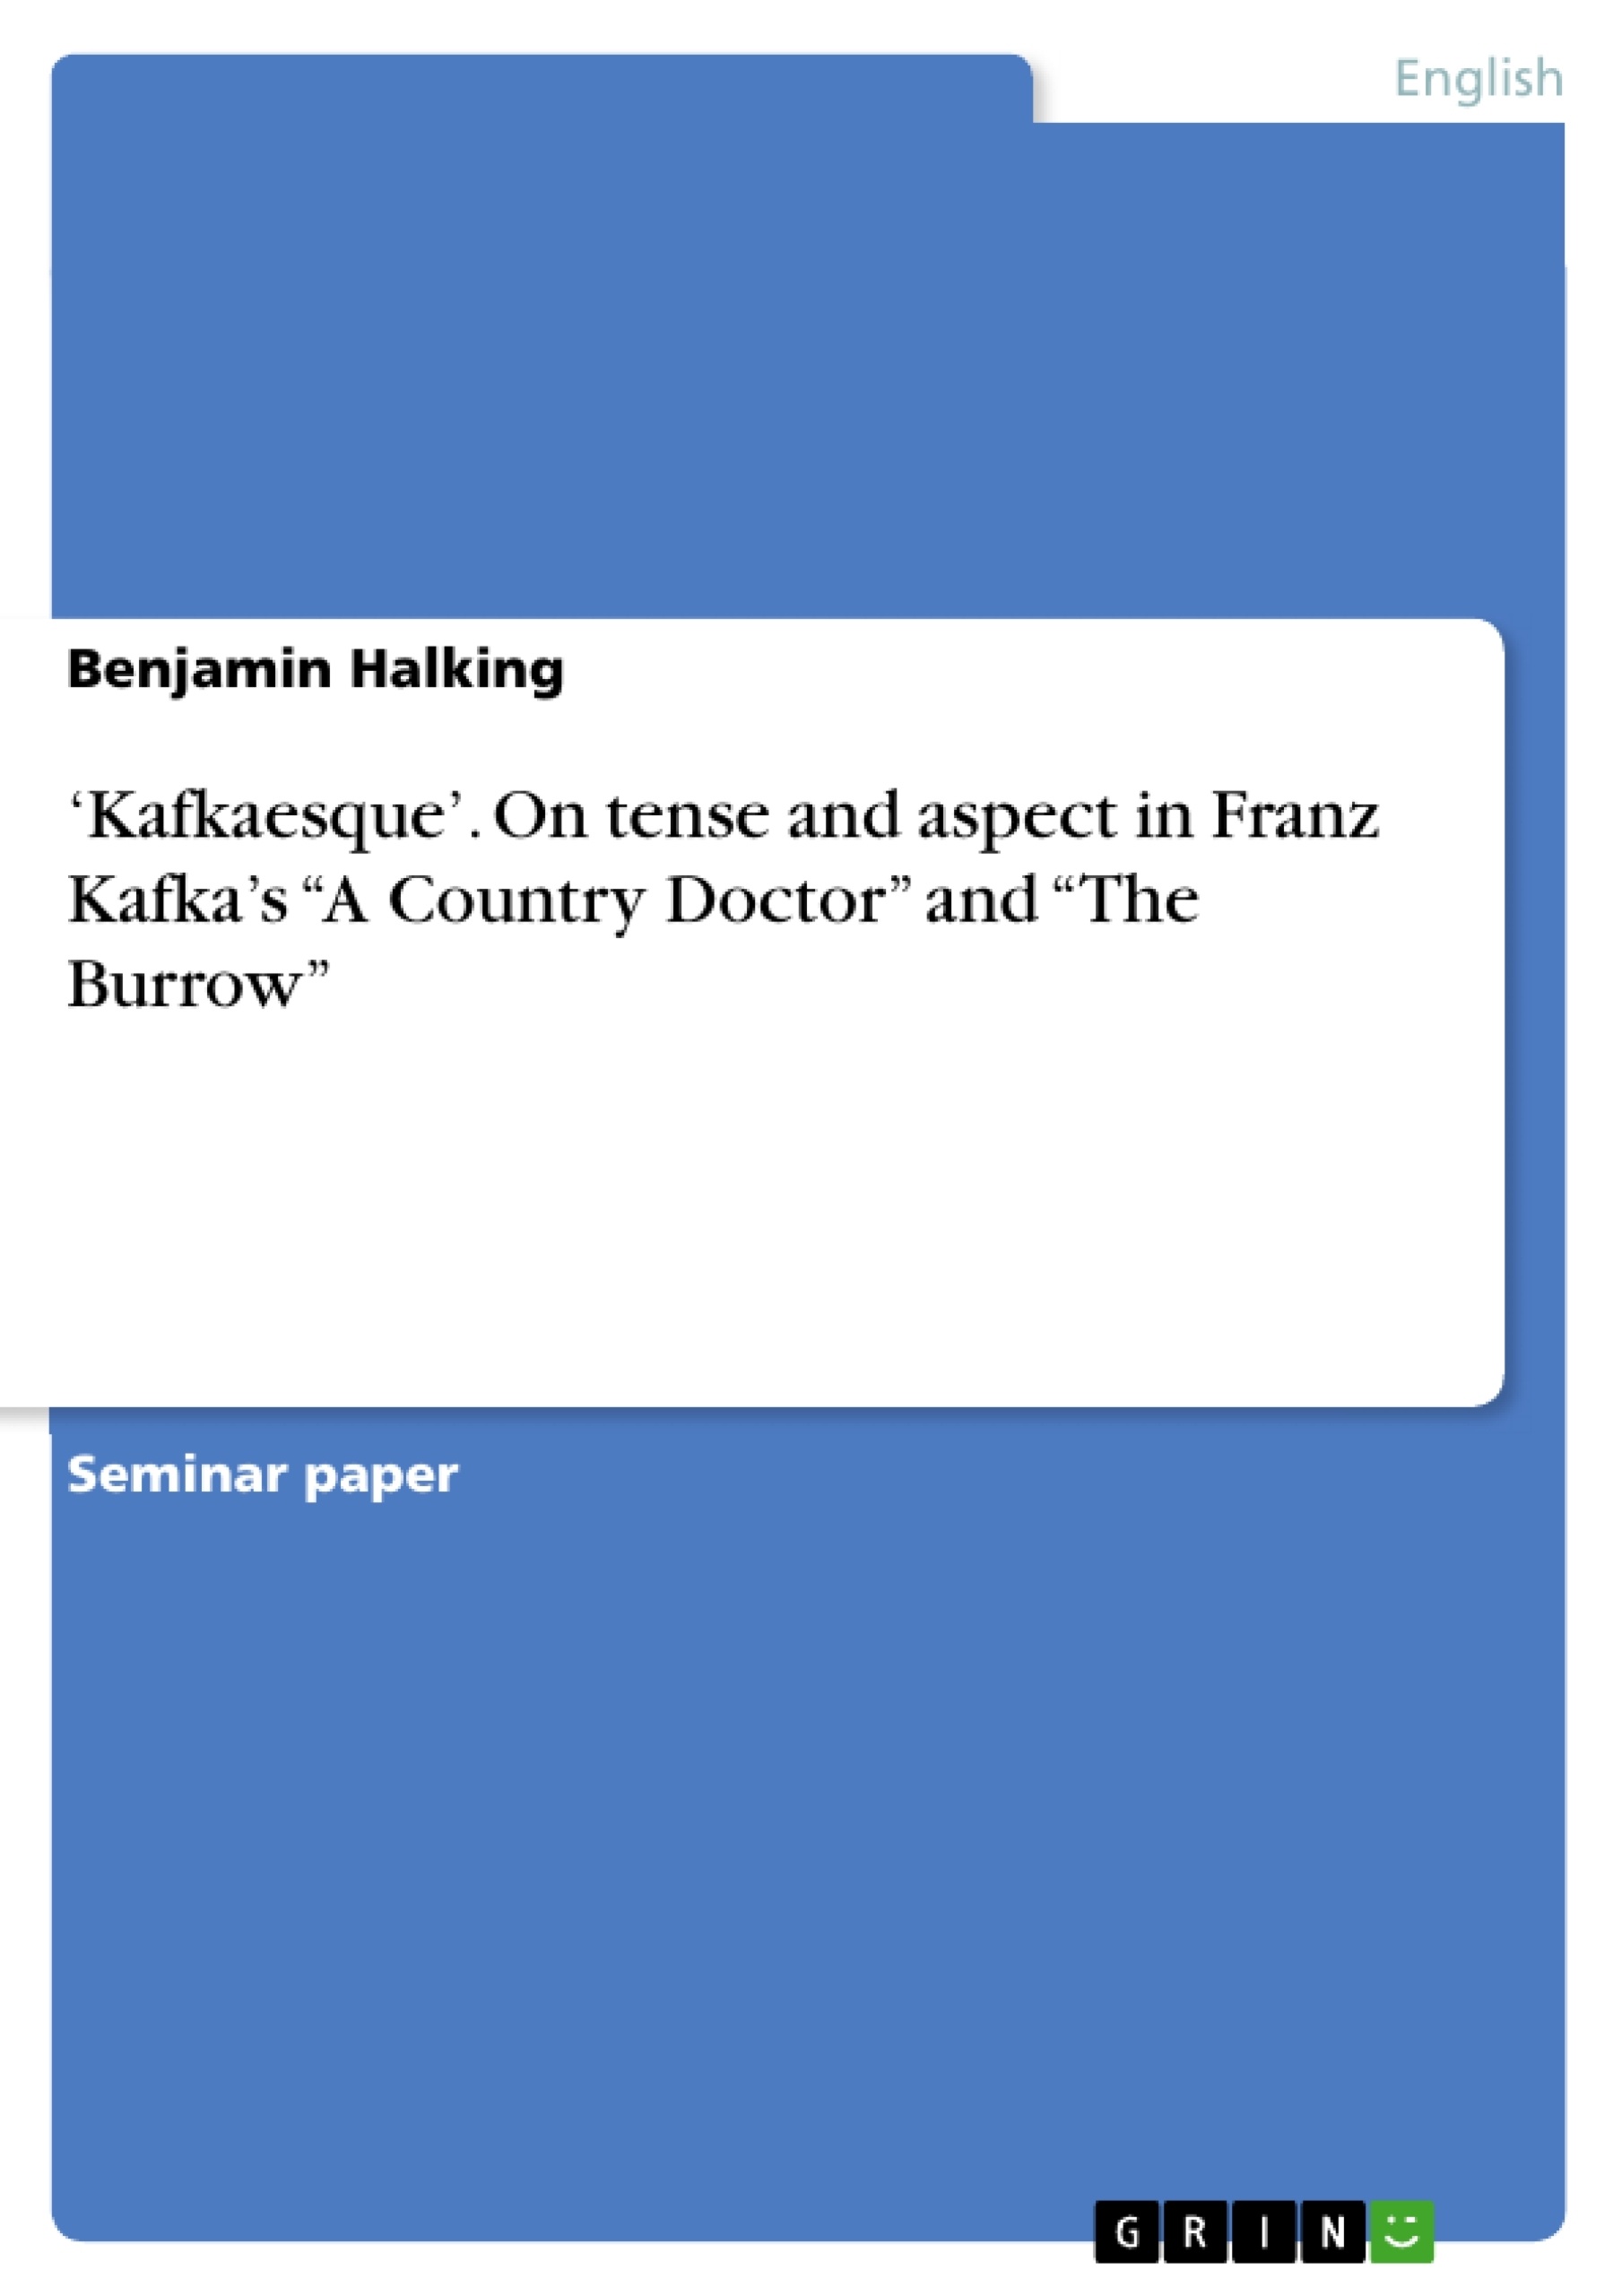 Title: ‘Kafkaesque’. On tense and aspect in Franz Kafka’s “A Country Doctor” and “The Burrow”